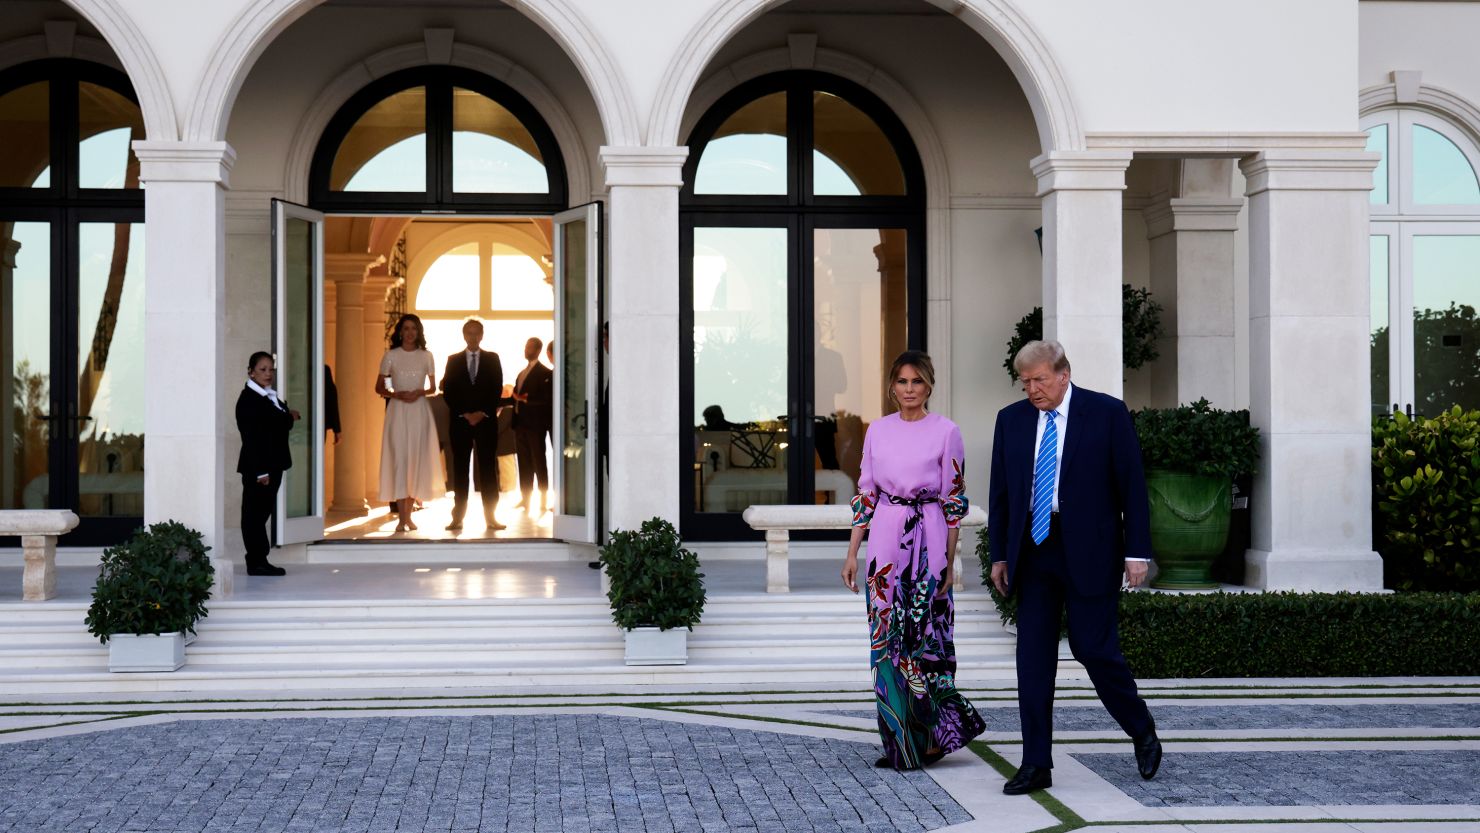 Former President Donald Trump arrives at the home of billionaire investor John Paulson for a fundraising dinner. (Photo by Alon Skuy/Getty Images)